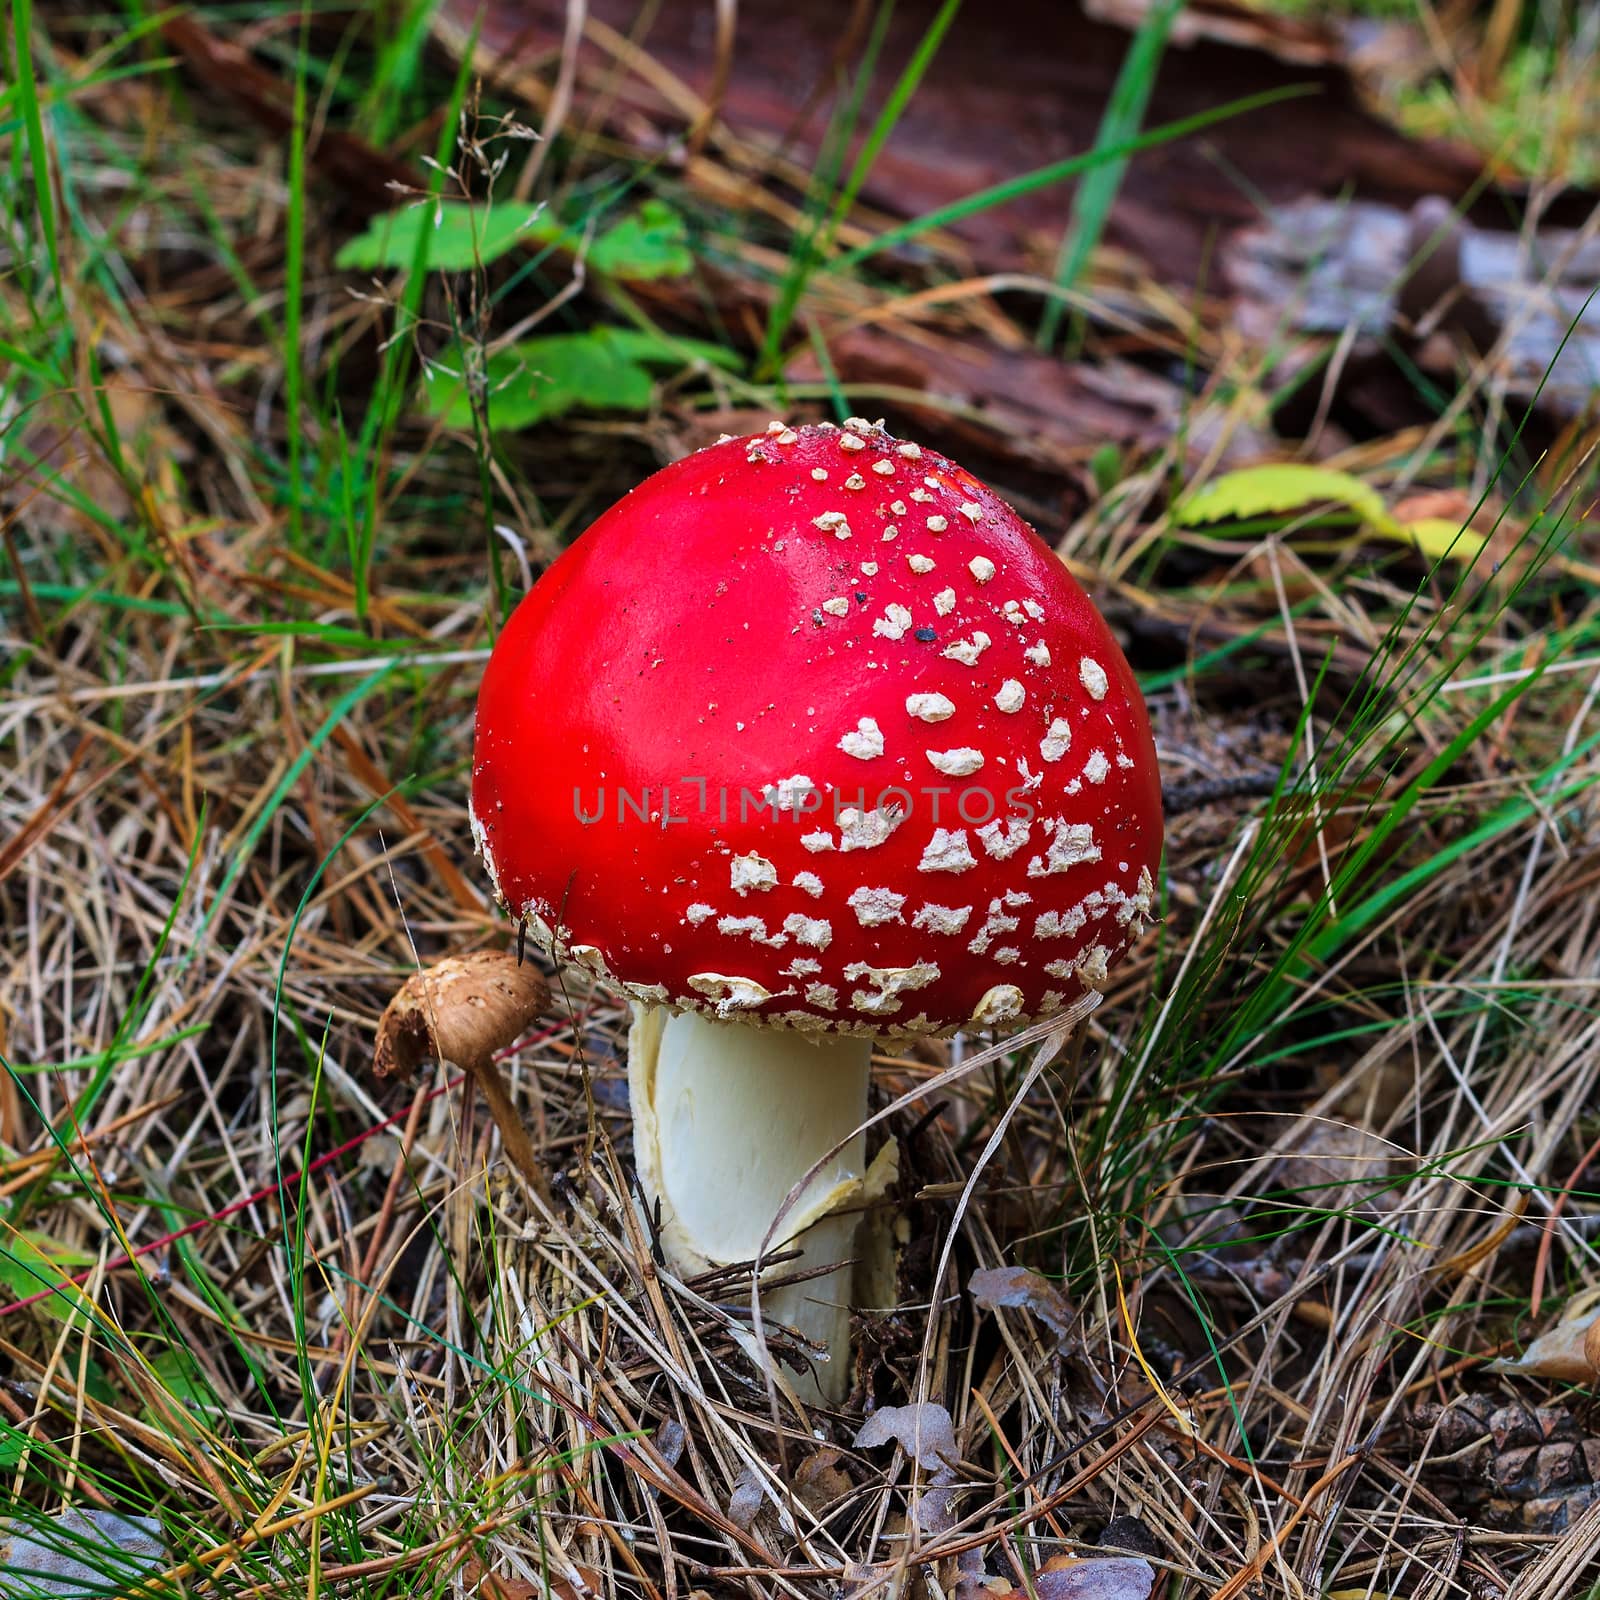 red amanita in the autumn forest on a cloudy day with needles in the background